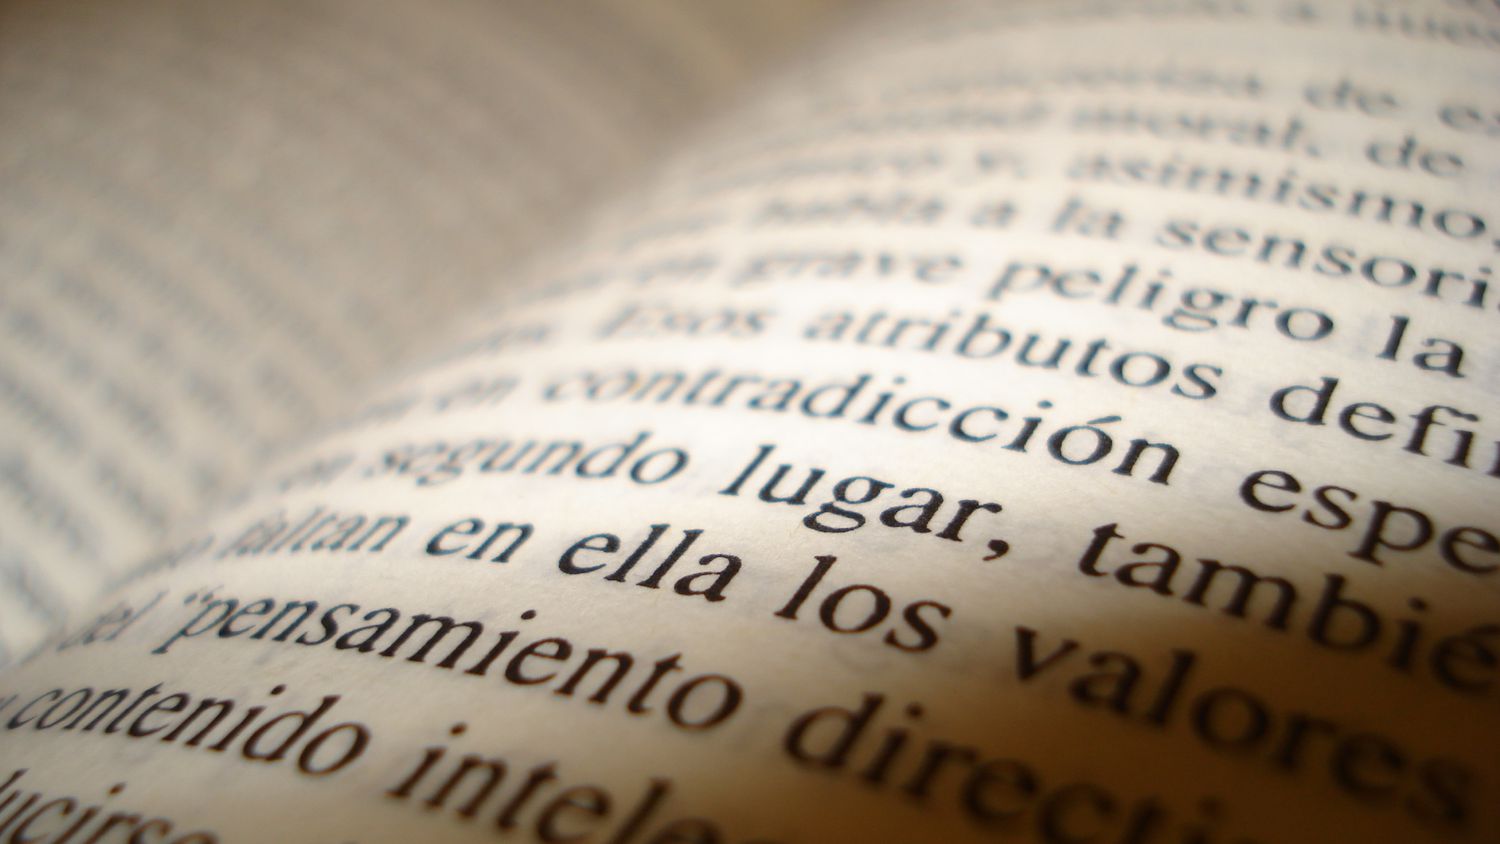 The Difference Between ‘Tengas’ And ‘Tienes’ In Spanish